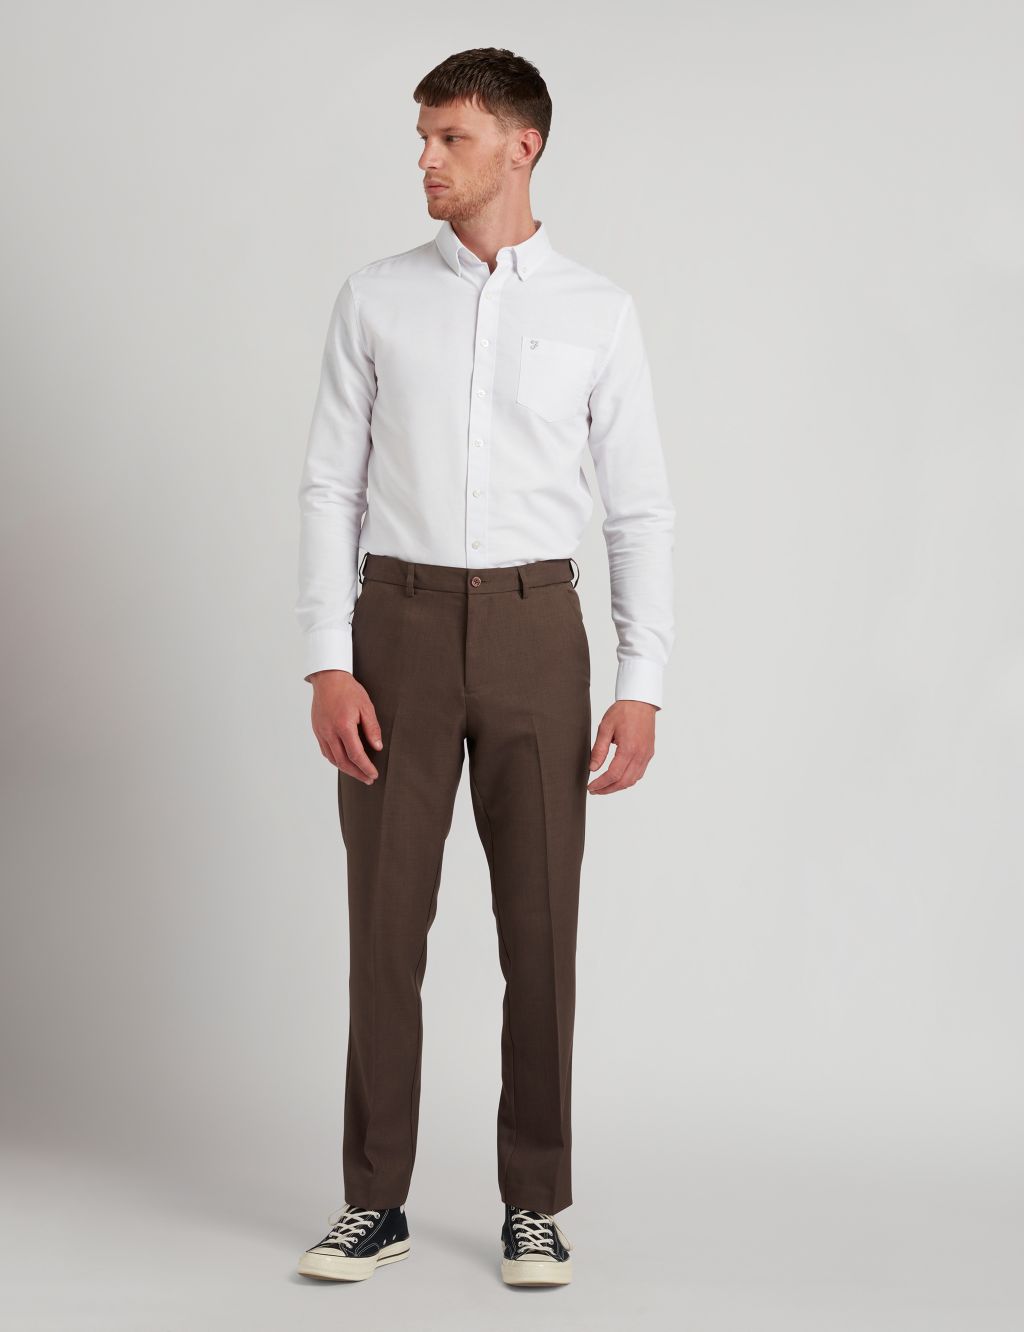 Tailored Fit Smart Trousers image 1